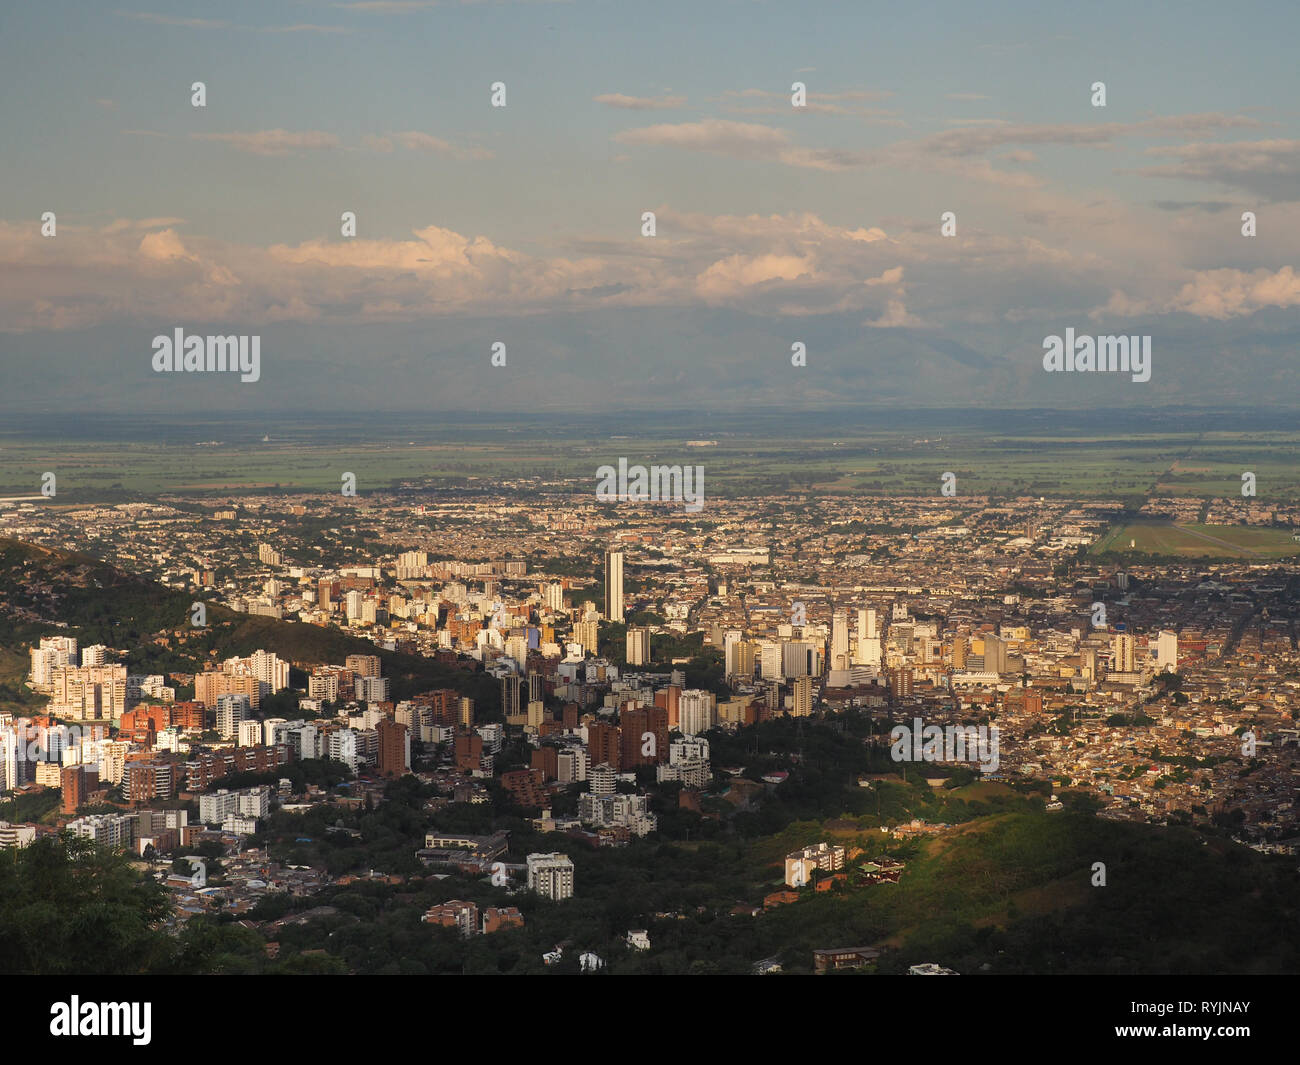 View over Cali, Colombia Stock Photo